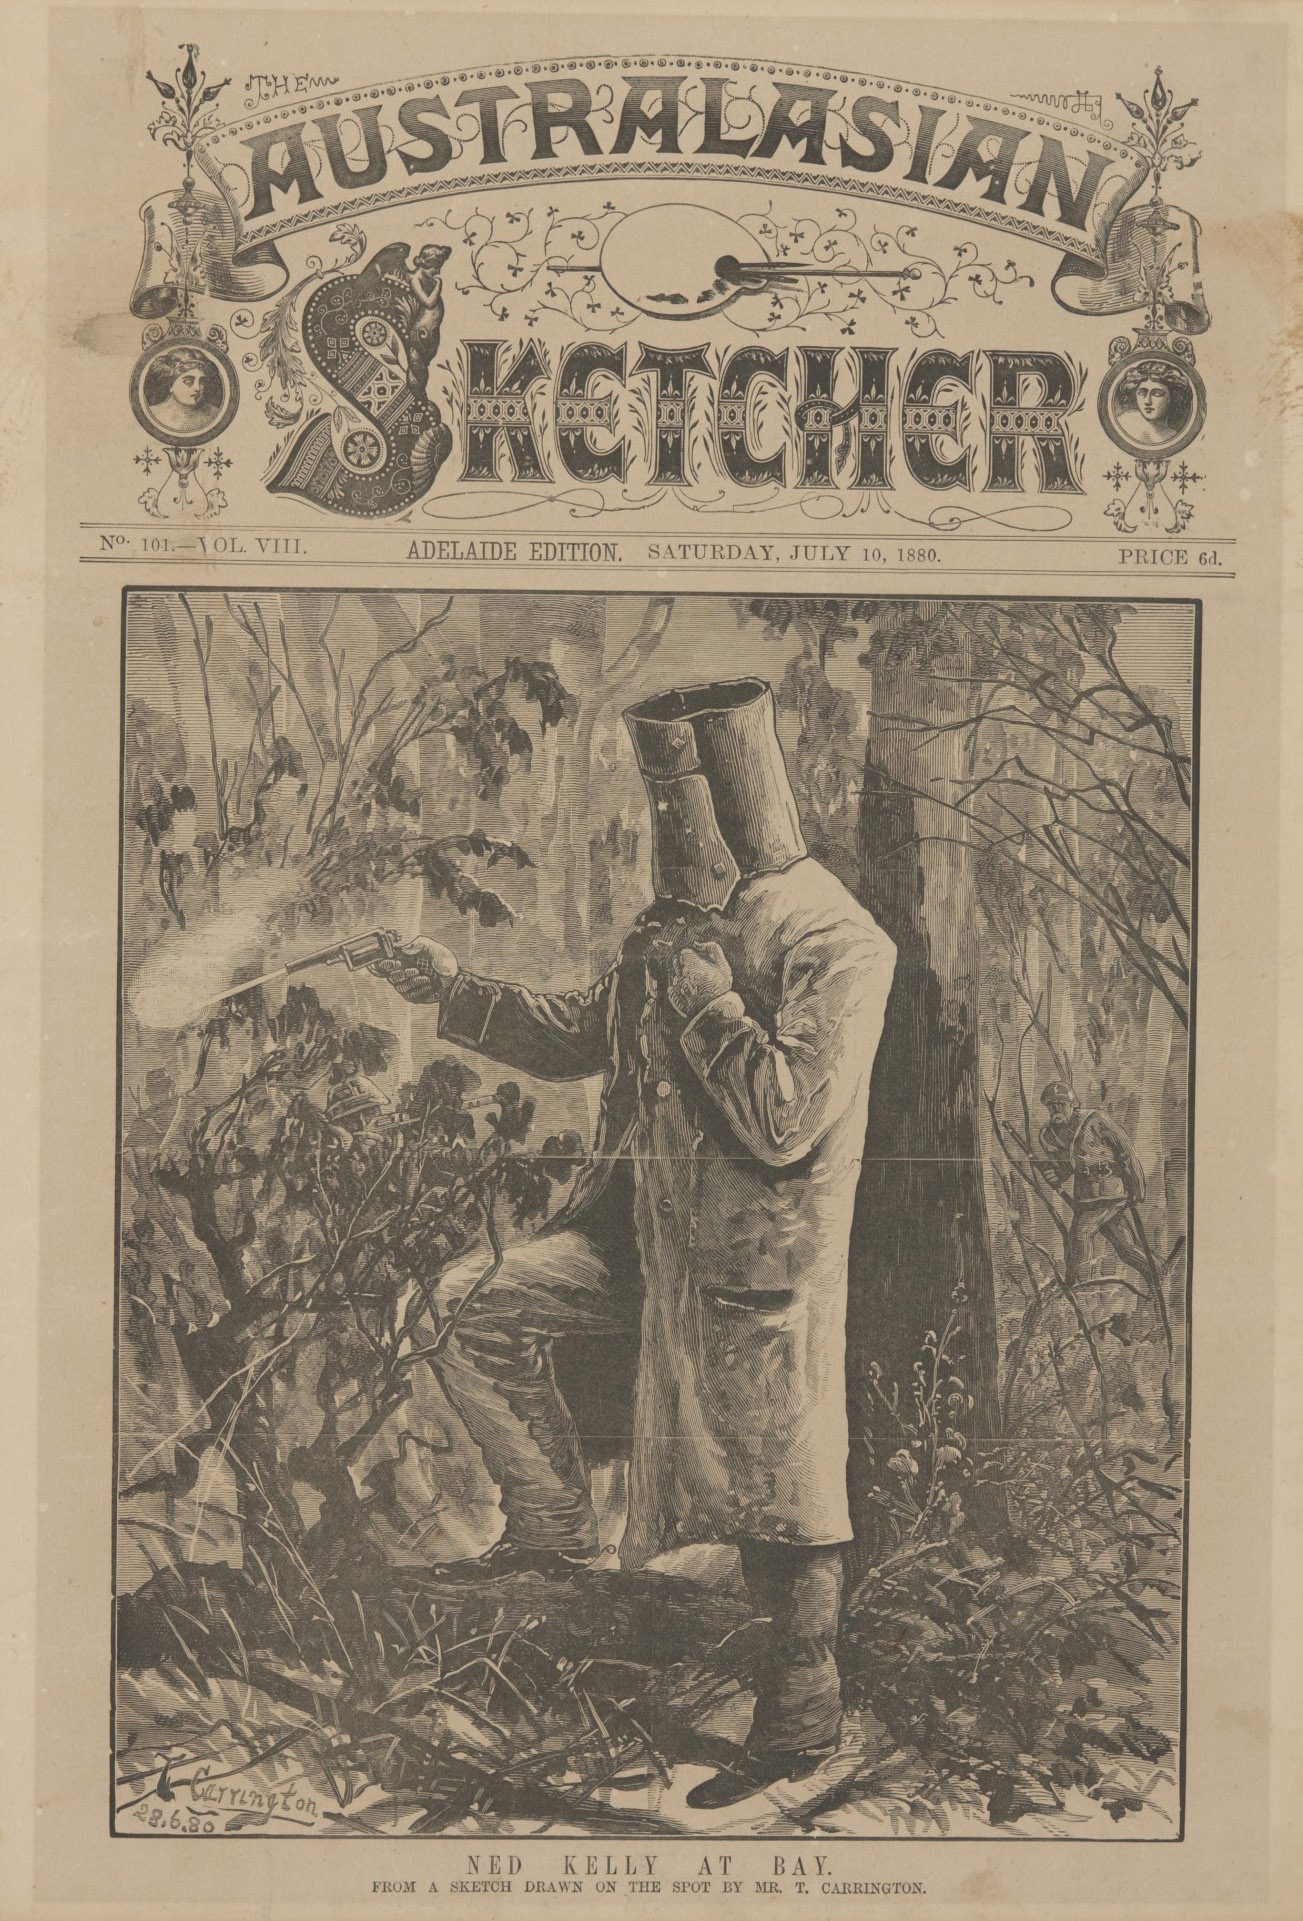 Ned Kelly on the cover of the Australasian Sketcher, 10 July 1880.